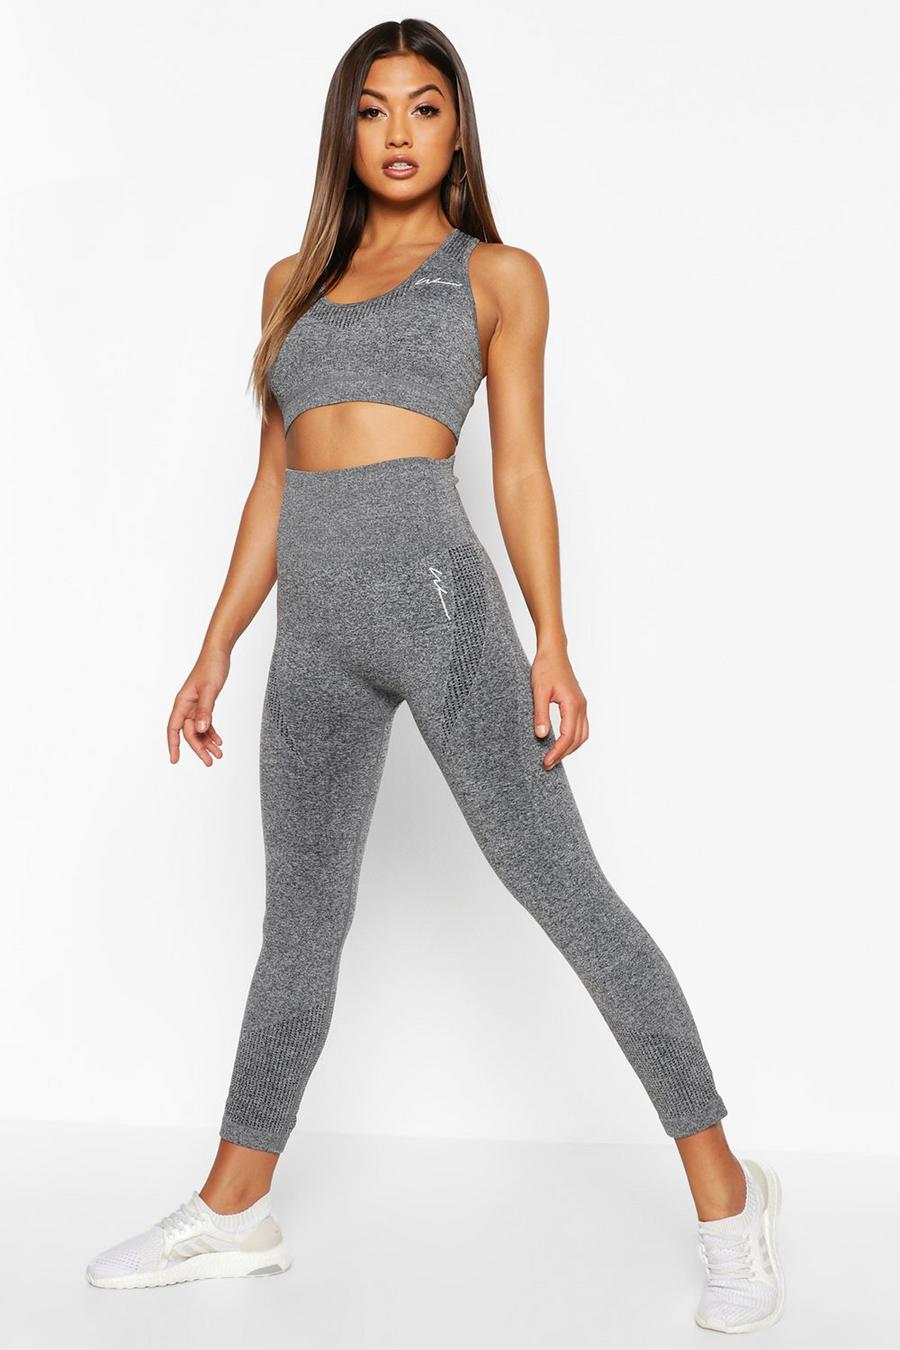 Dark grey gris Fit Supportive Waistband Seamless Gym Leggings